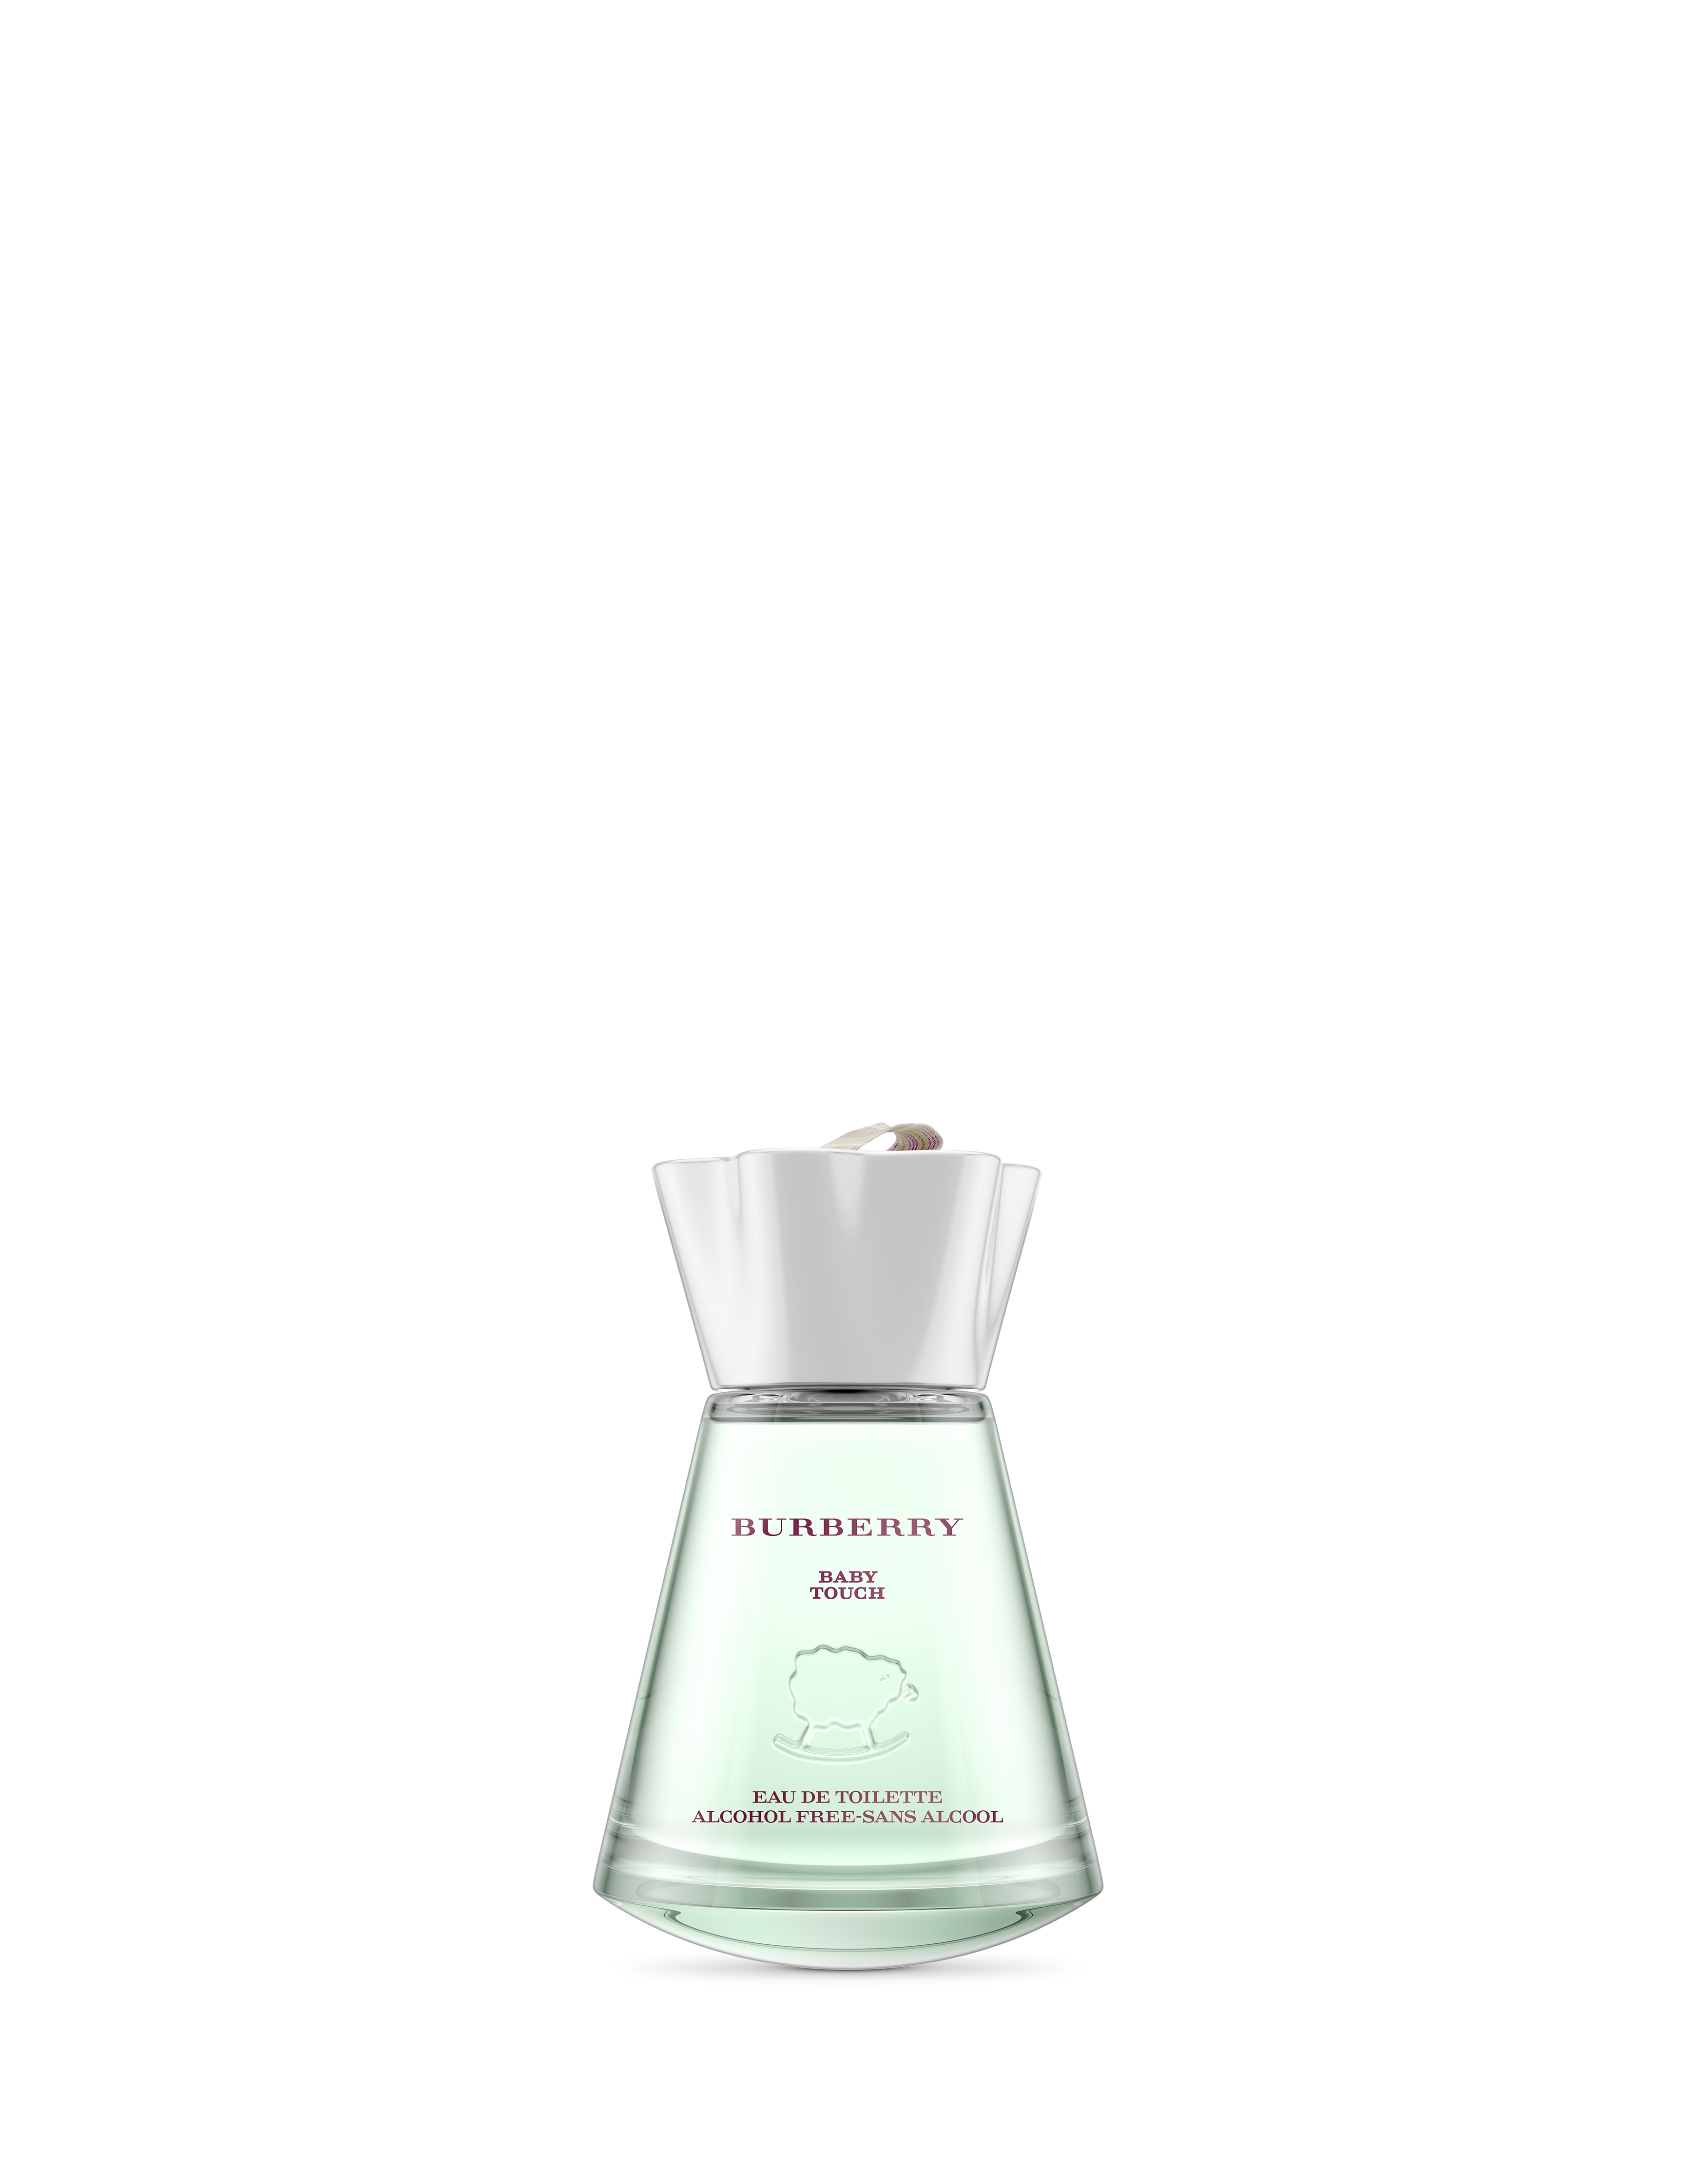 BURBERRY BABY TOUCH 100 ML S/ALCOHOL VP.